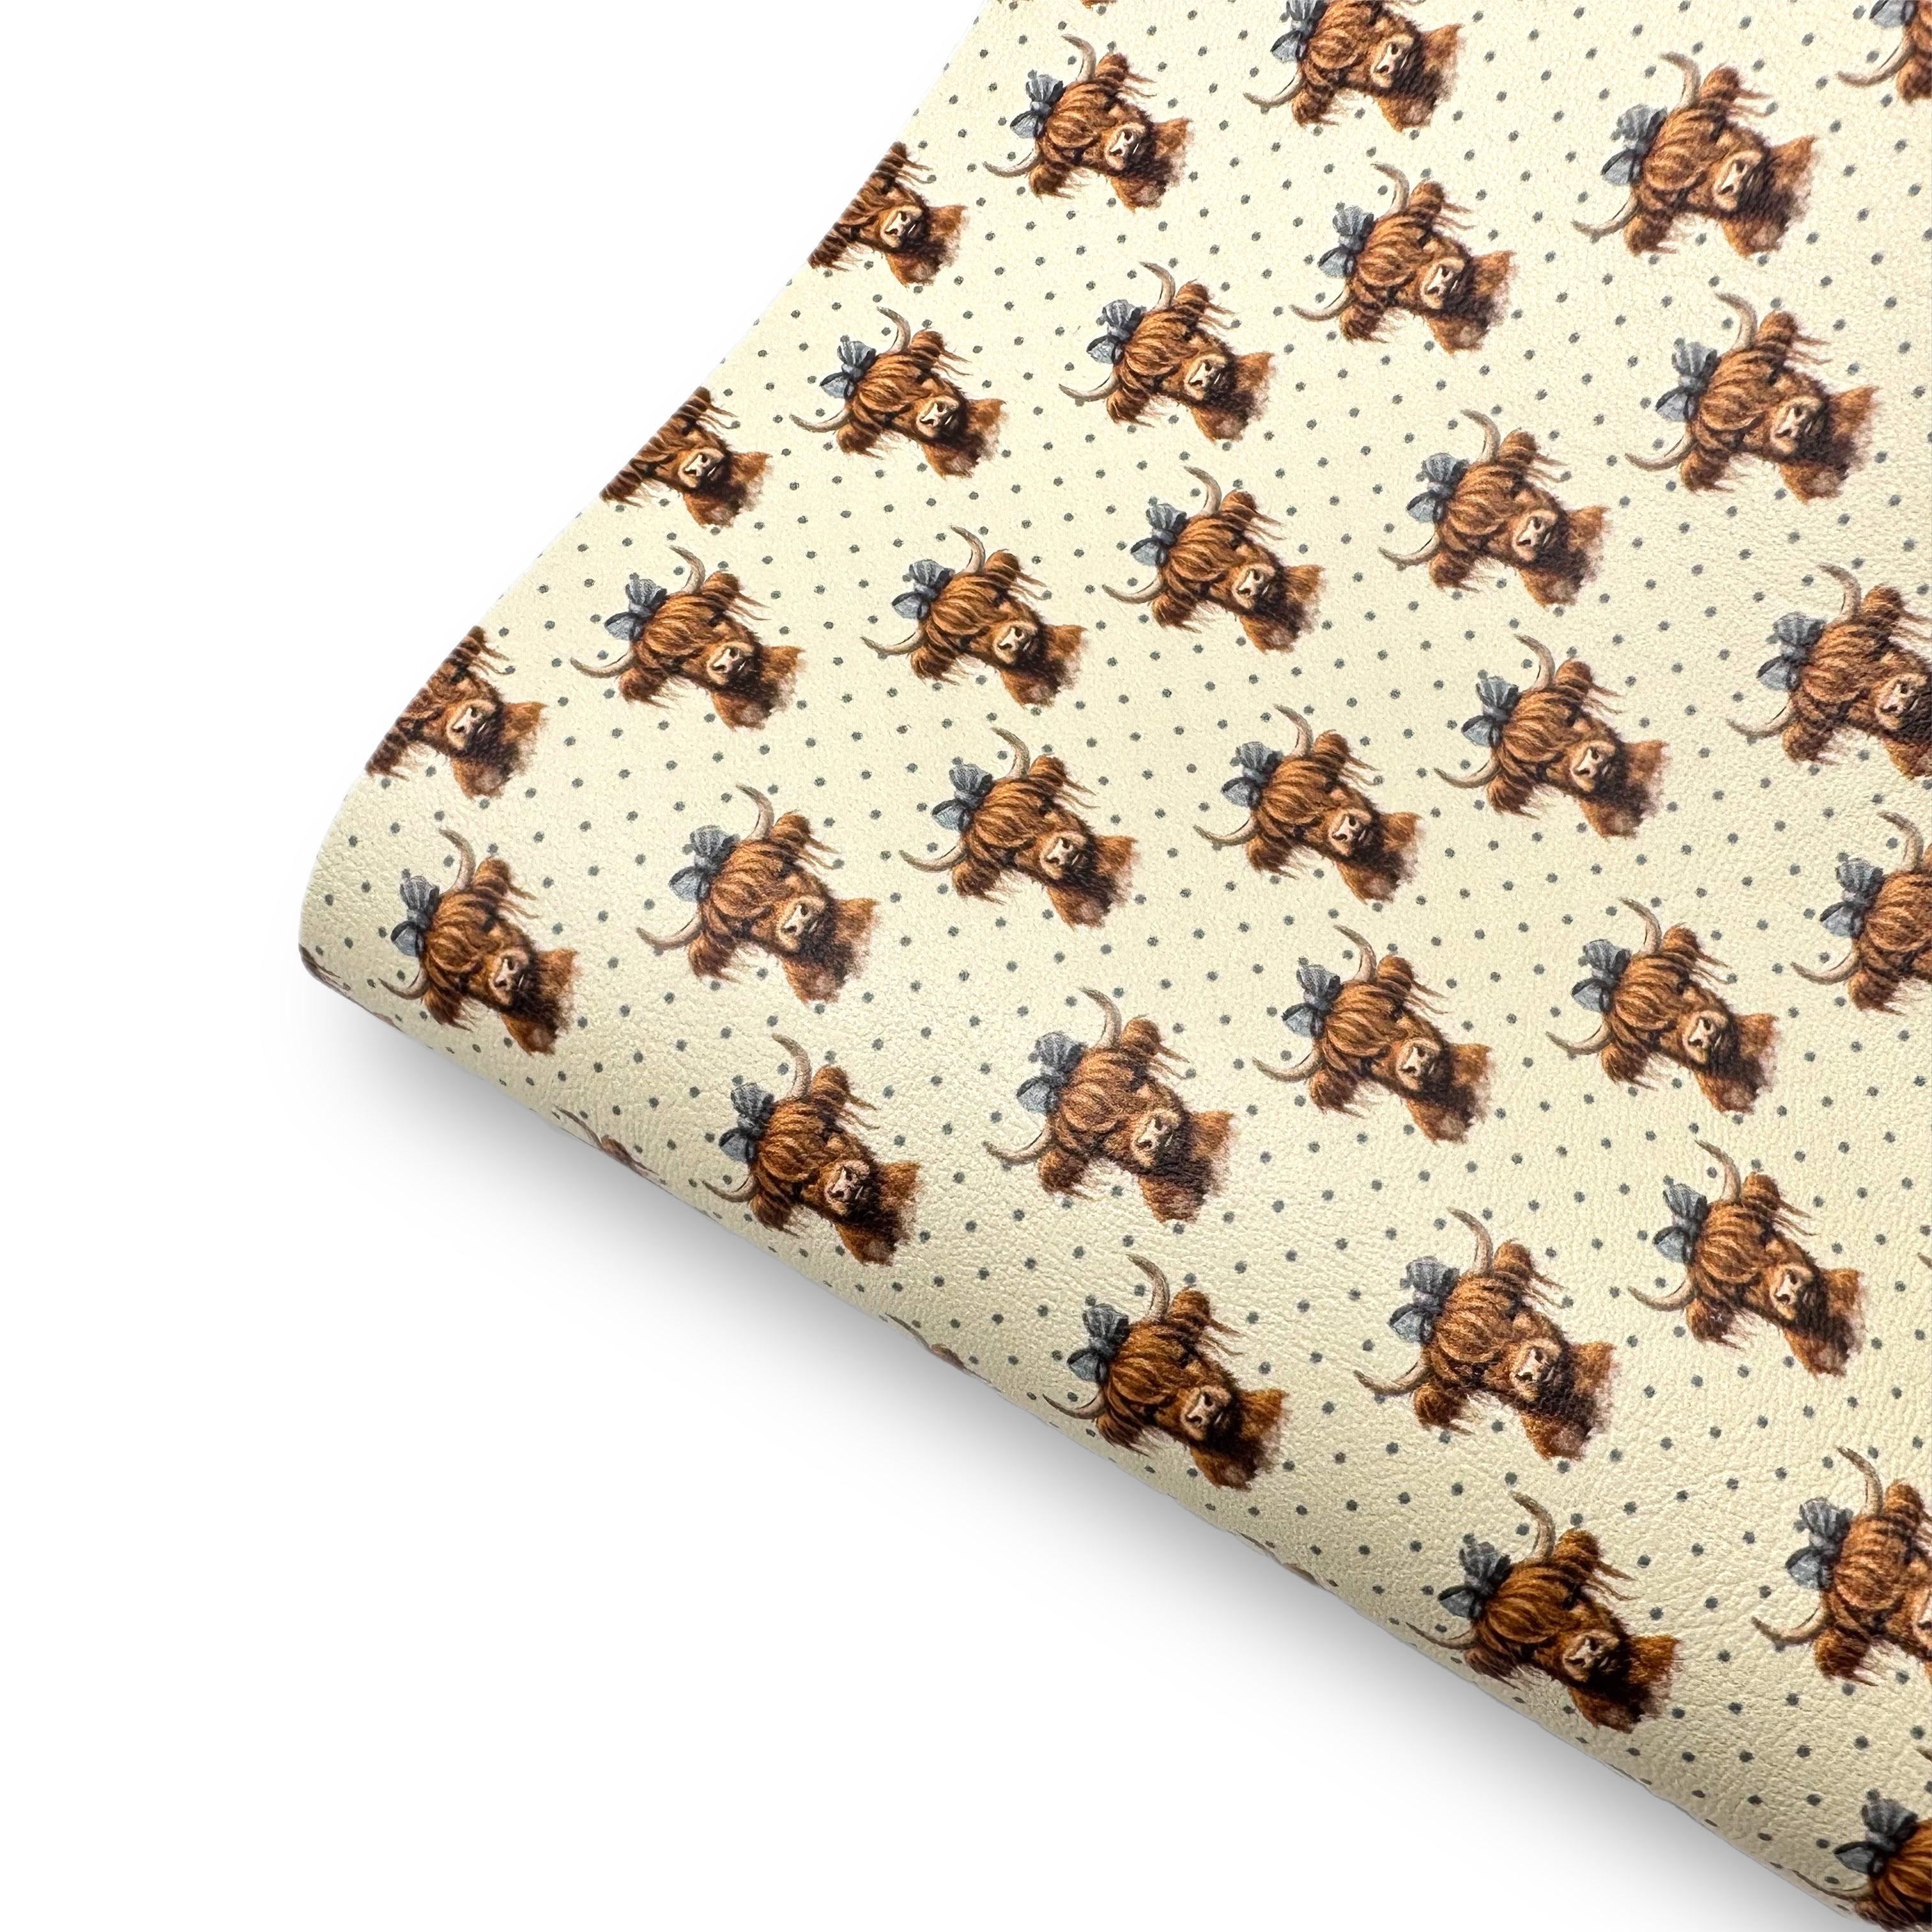 Highland Cows Premium Faux Leather Fabric Sheets